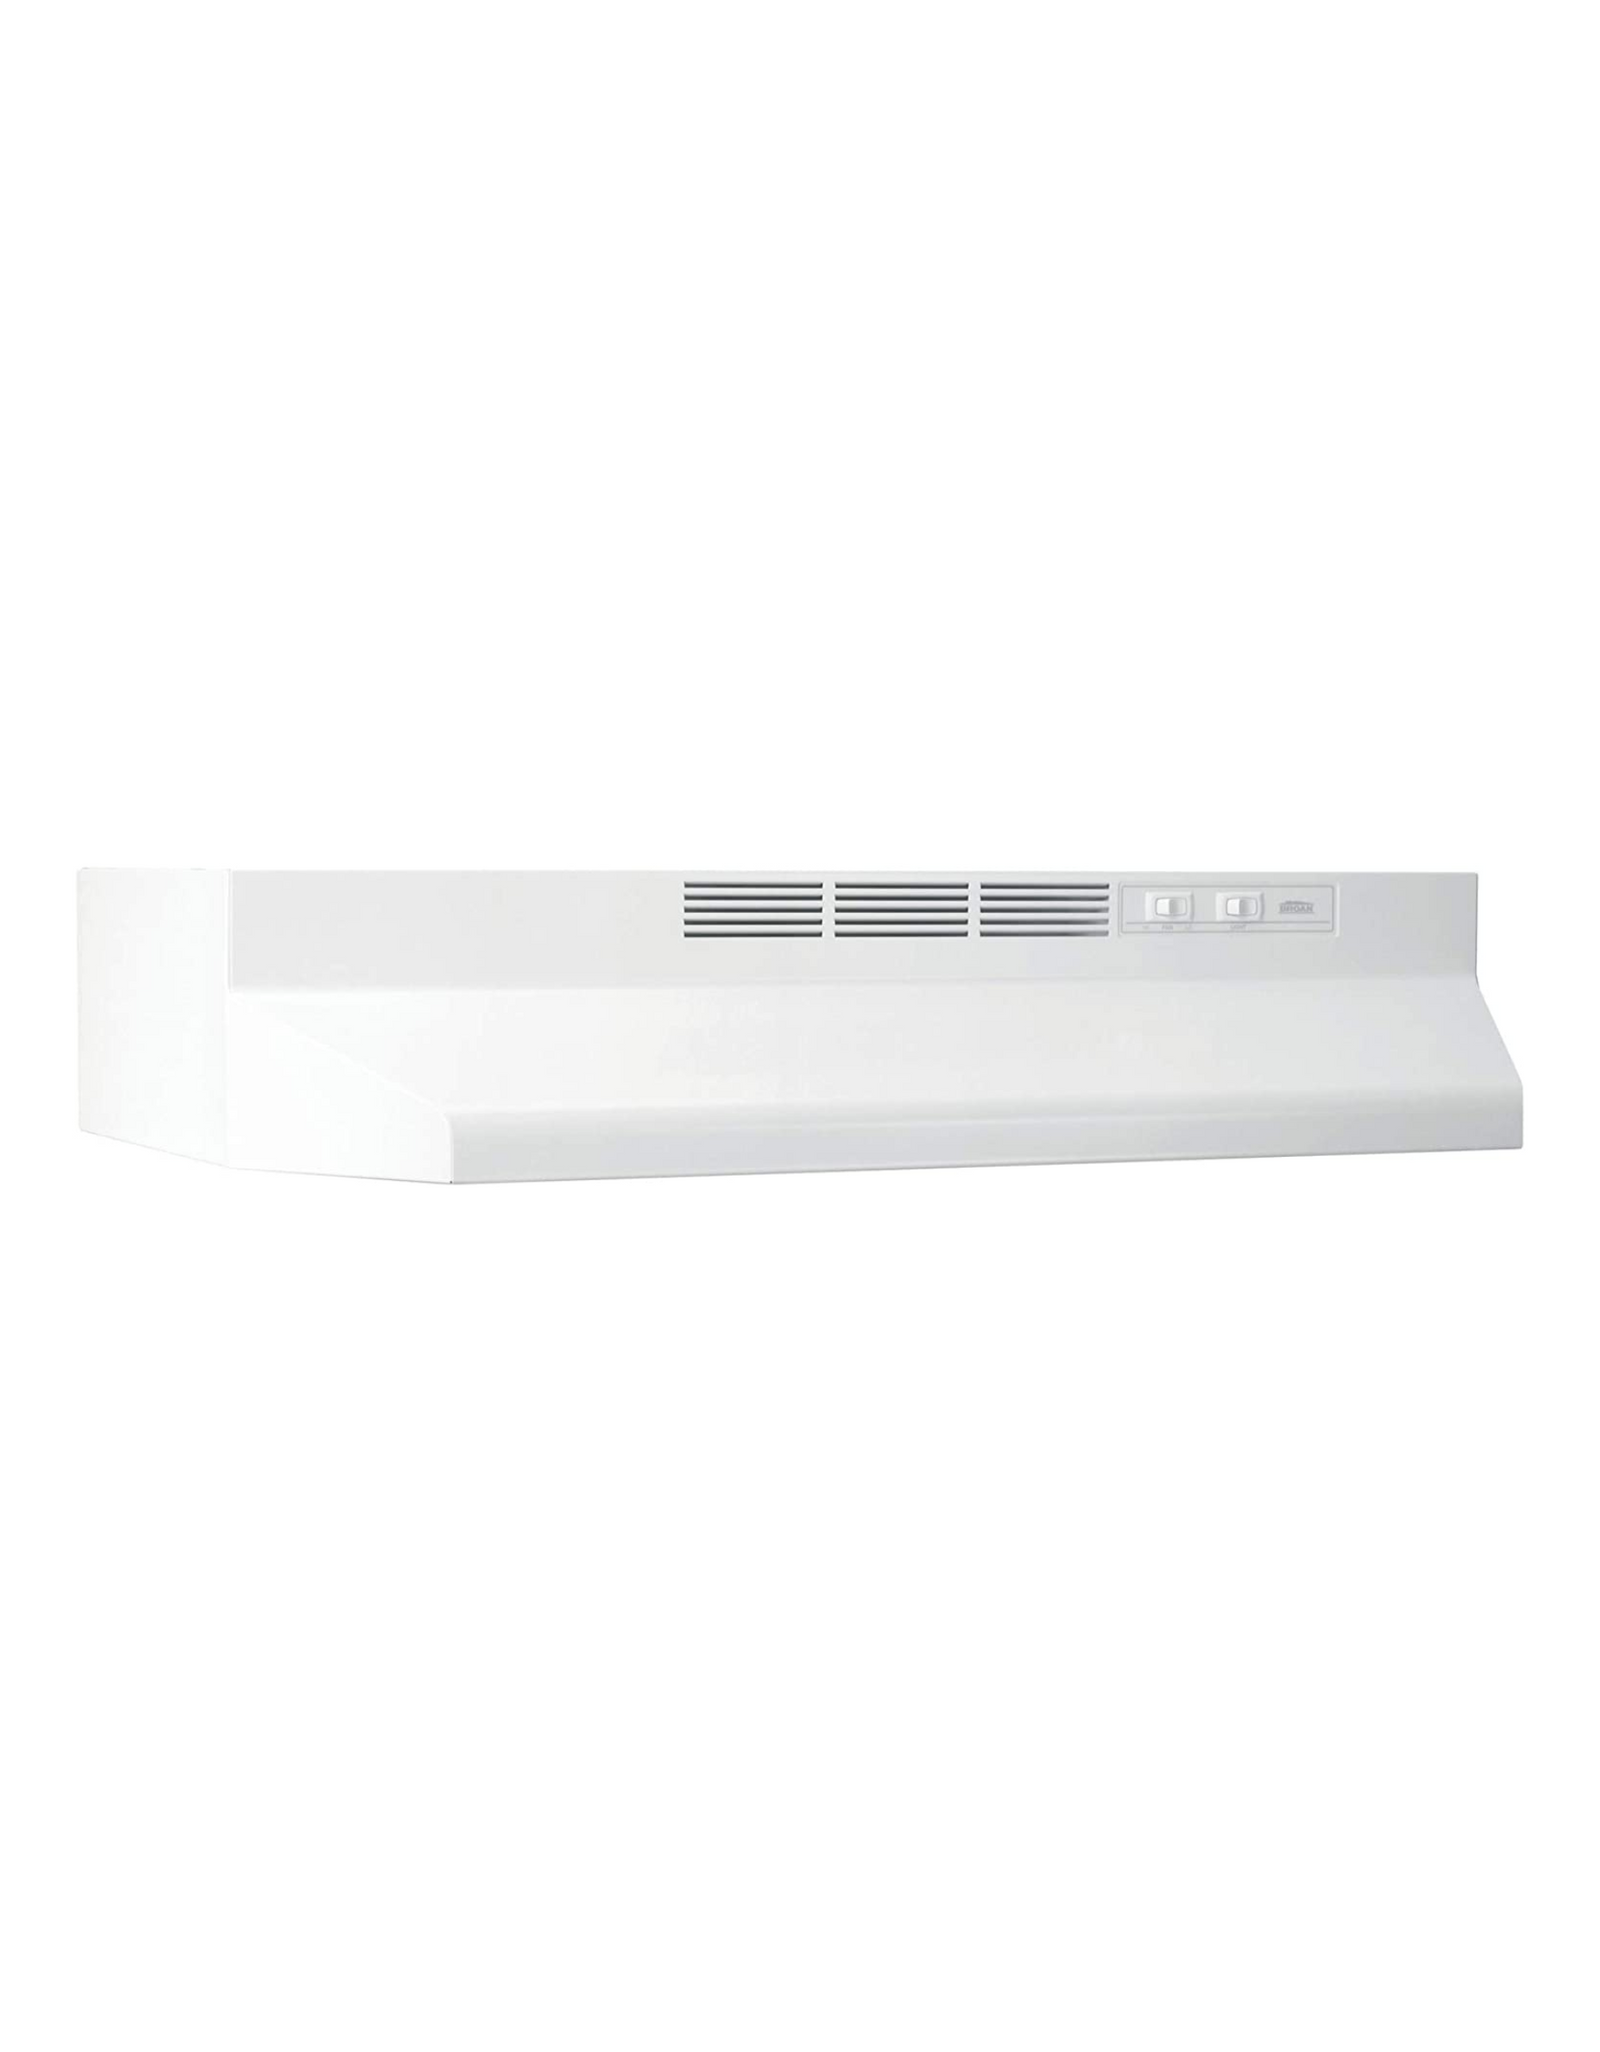 Broan-NuTone 413001 Non-Ducted Ductless Range Hood with Lights Exhaust Fan, 30", White